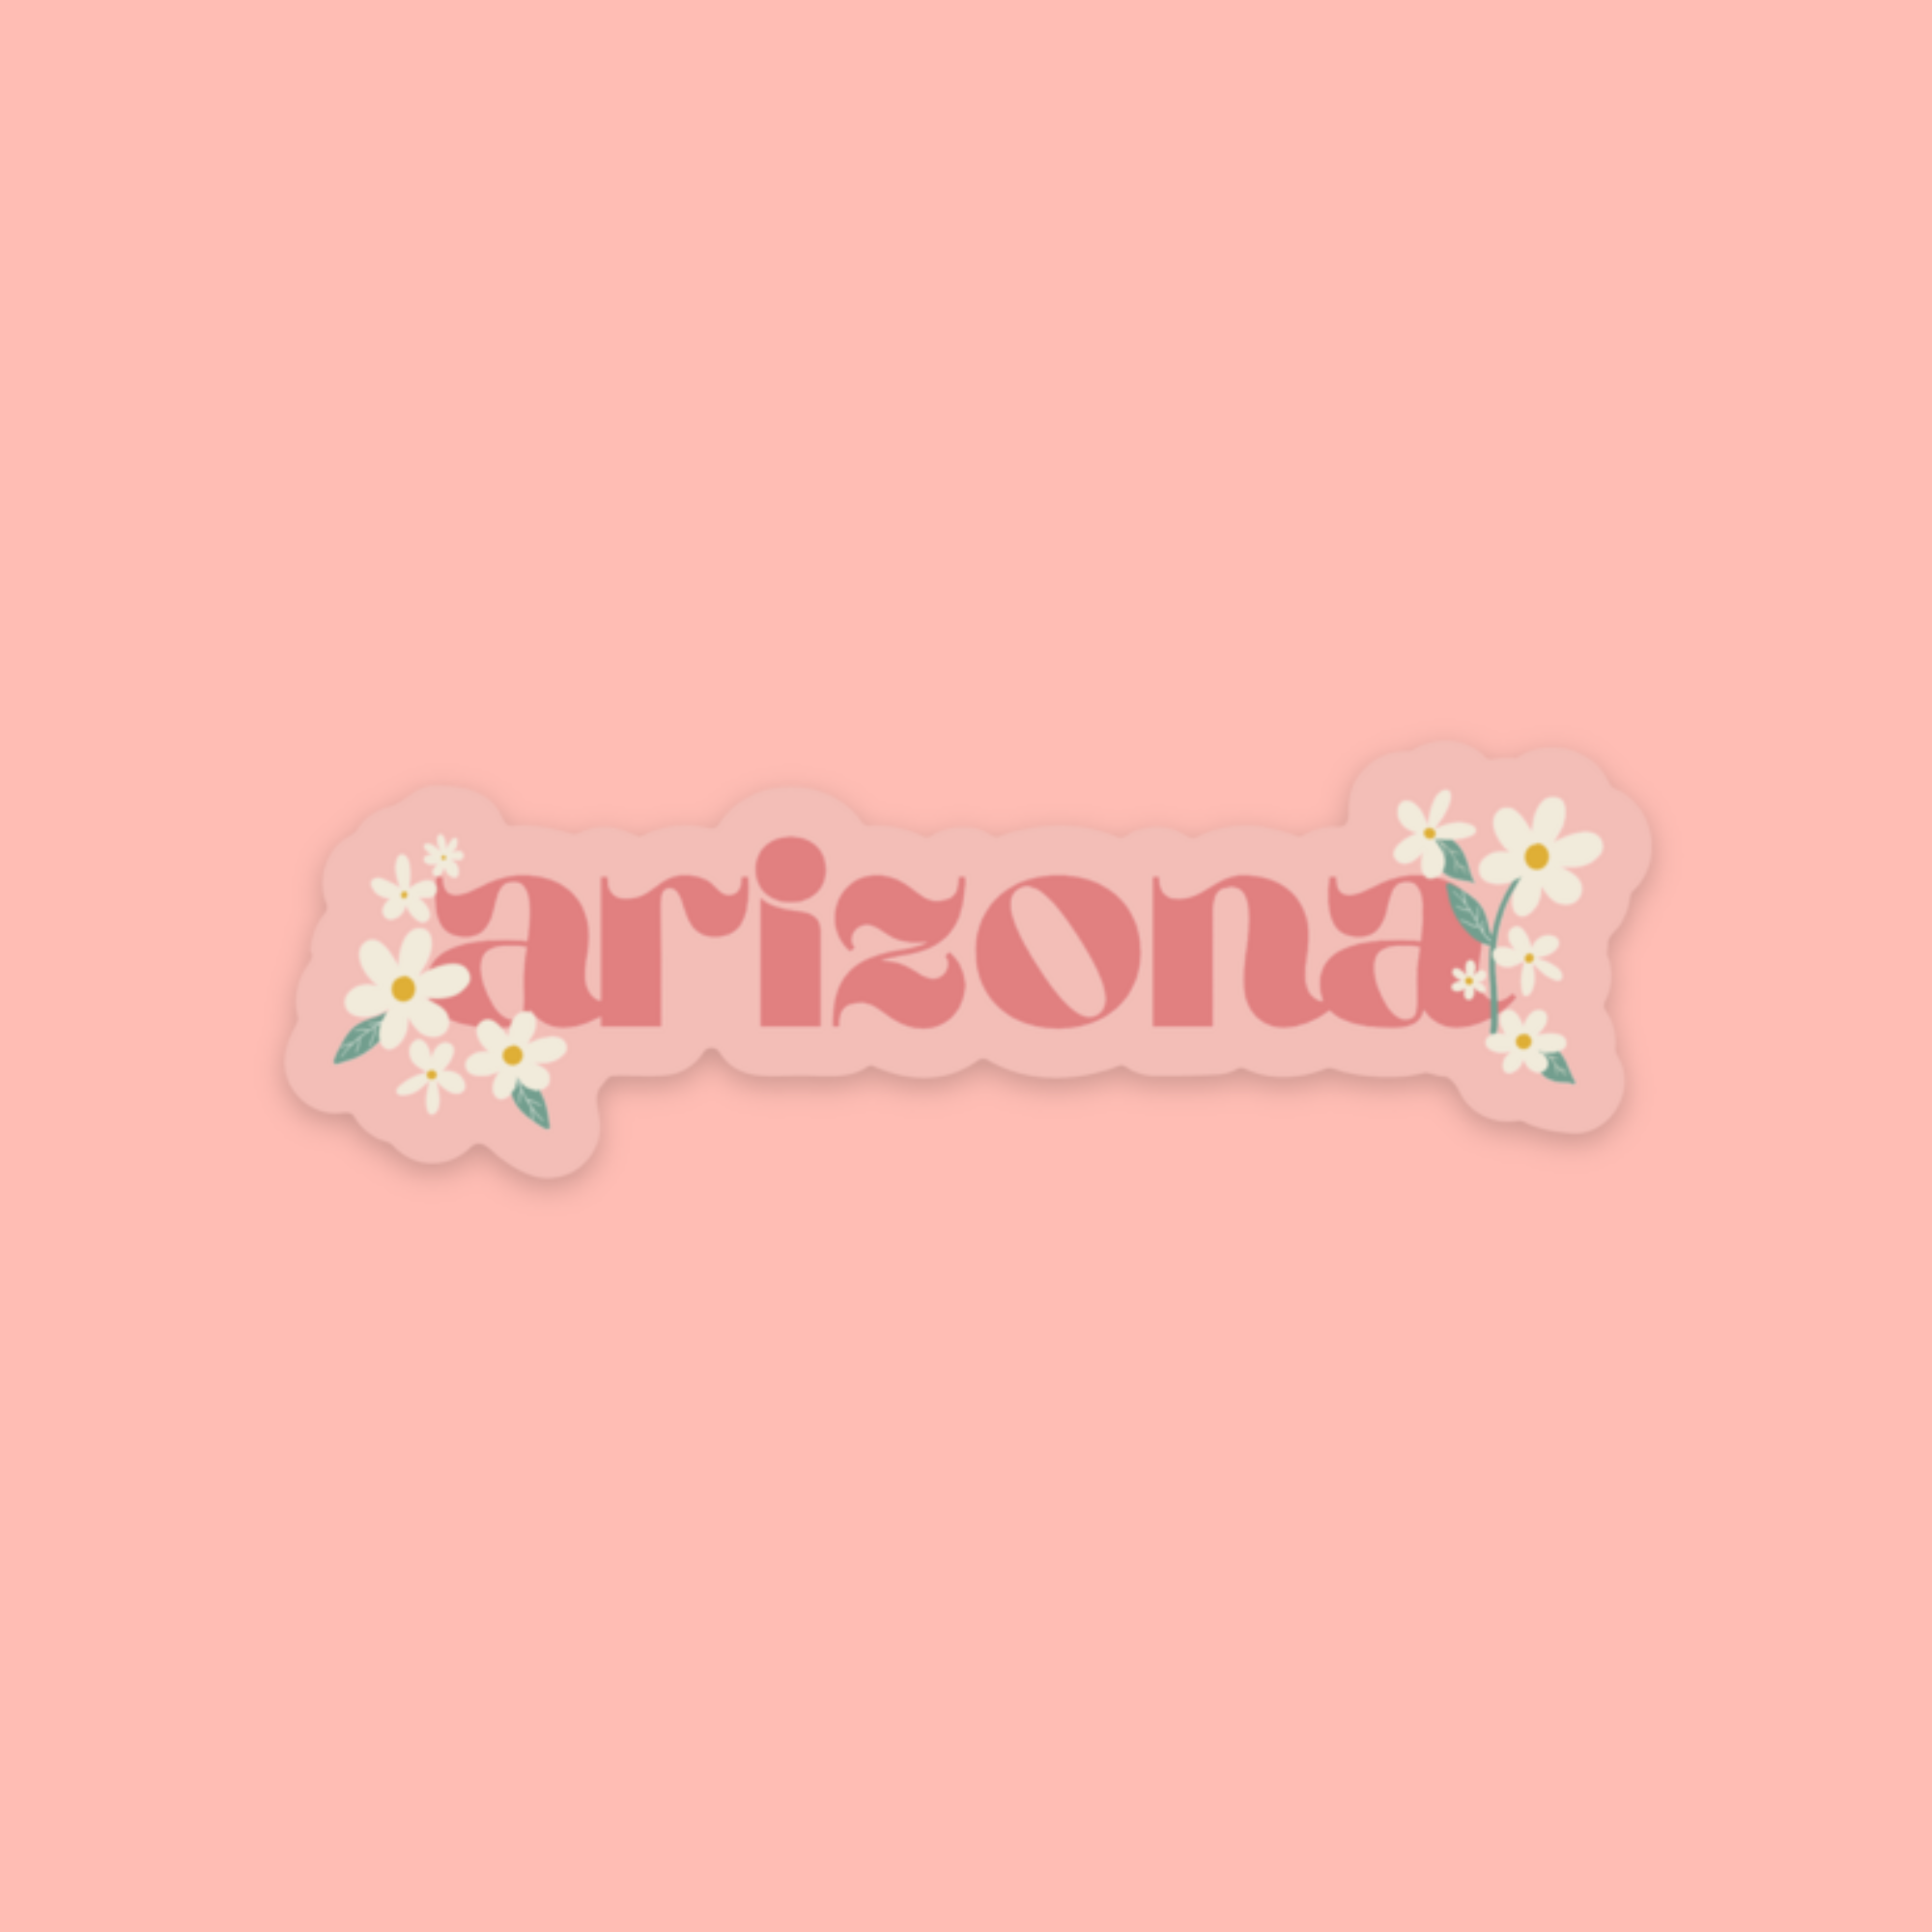 Die cut sticker with clear back and the word "arizona" surrounded by daisies shown on a pink background color to display transparency